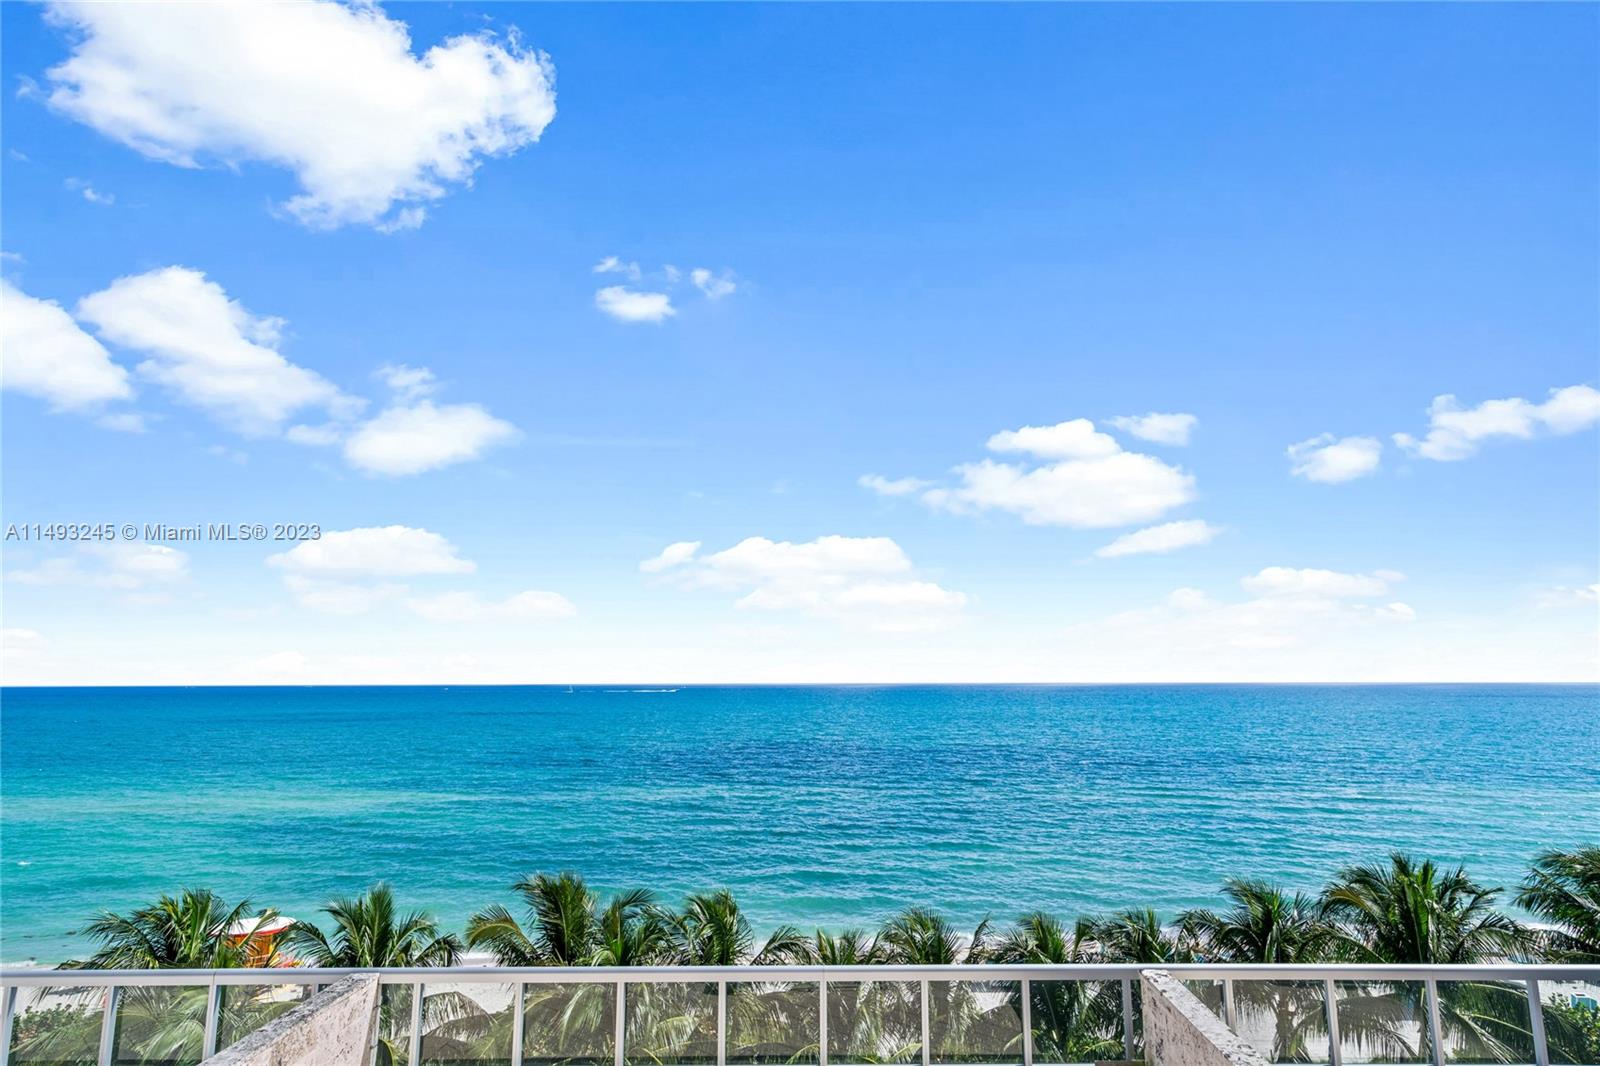 Enjoy gorgeous direct ocean views from this fully furnished 3-bedroom, 3-bathroom flow through residence located in the exclusive Carillon North Tower in Miami Beach. Beautiful bay and city views as well. Open kitchen with subzero refrigerator. Deluxe amenities in one of the most exclusive spa-resorts in South Florida. Resort features 70 000 sq.ft. over 200 classes weekly, 4 pools, 4 on-site dinning venues and more.